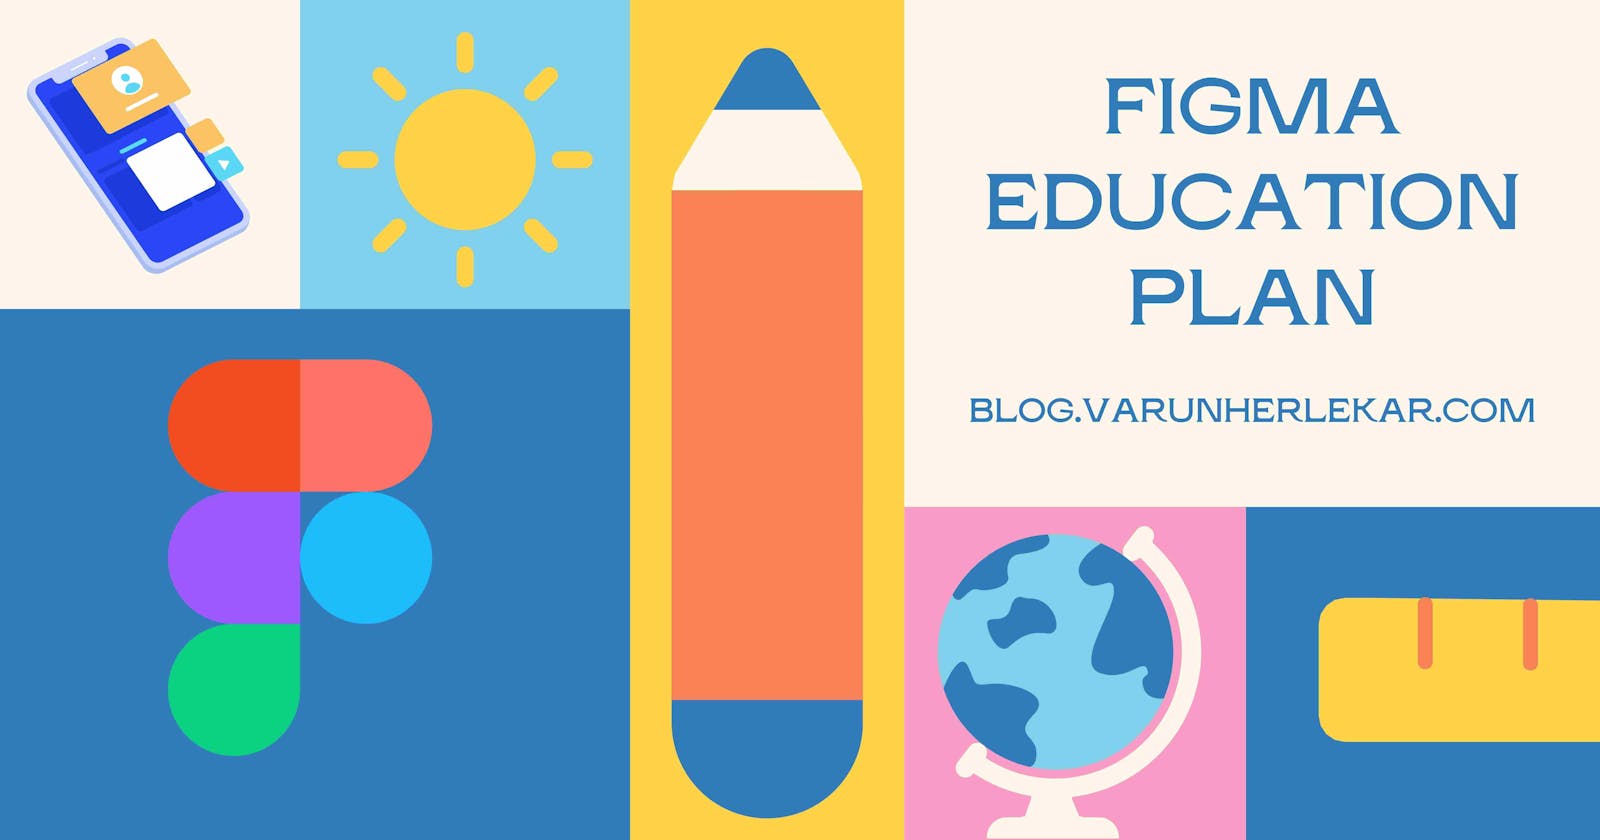 All you need to know about the education plan for Figma